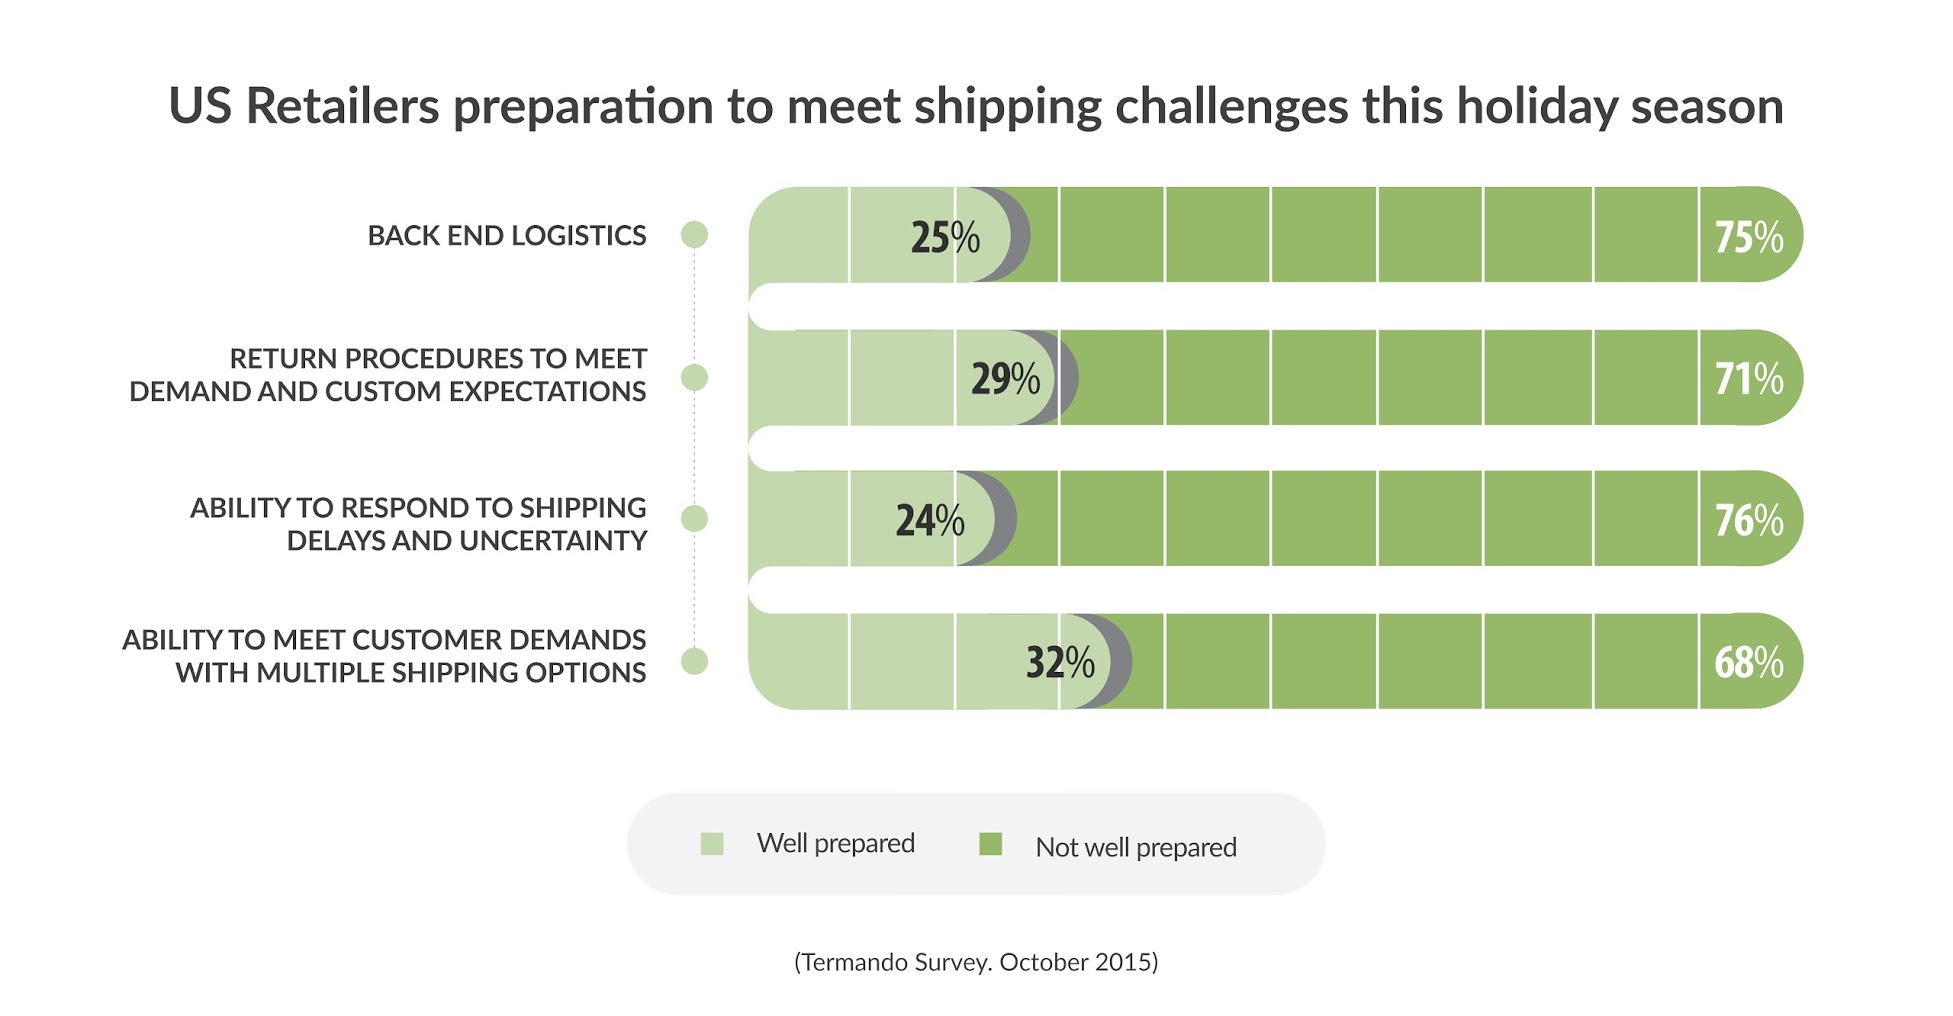 U.S. retailers' preparation on four (4) key shipping issues